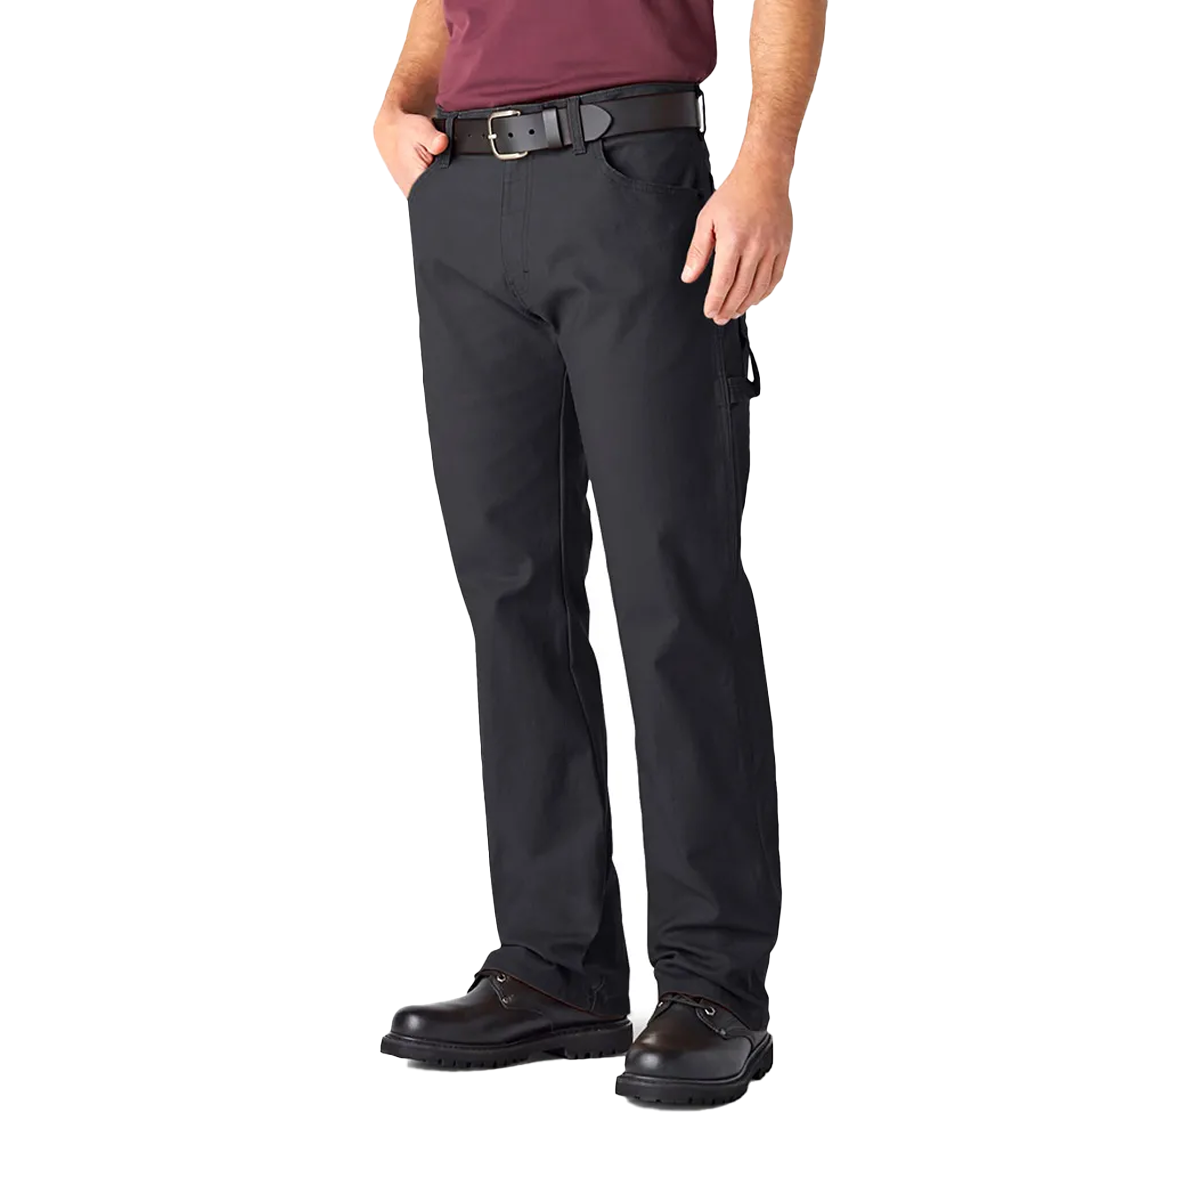 Dickies Relaxed Fit Heavyweight Duck Carpenter Pants - Rinsed Black